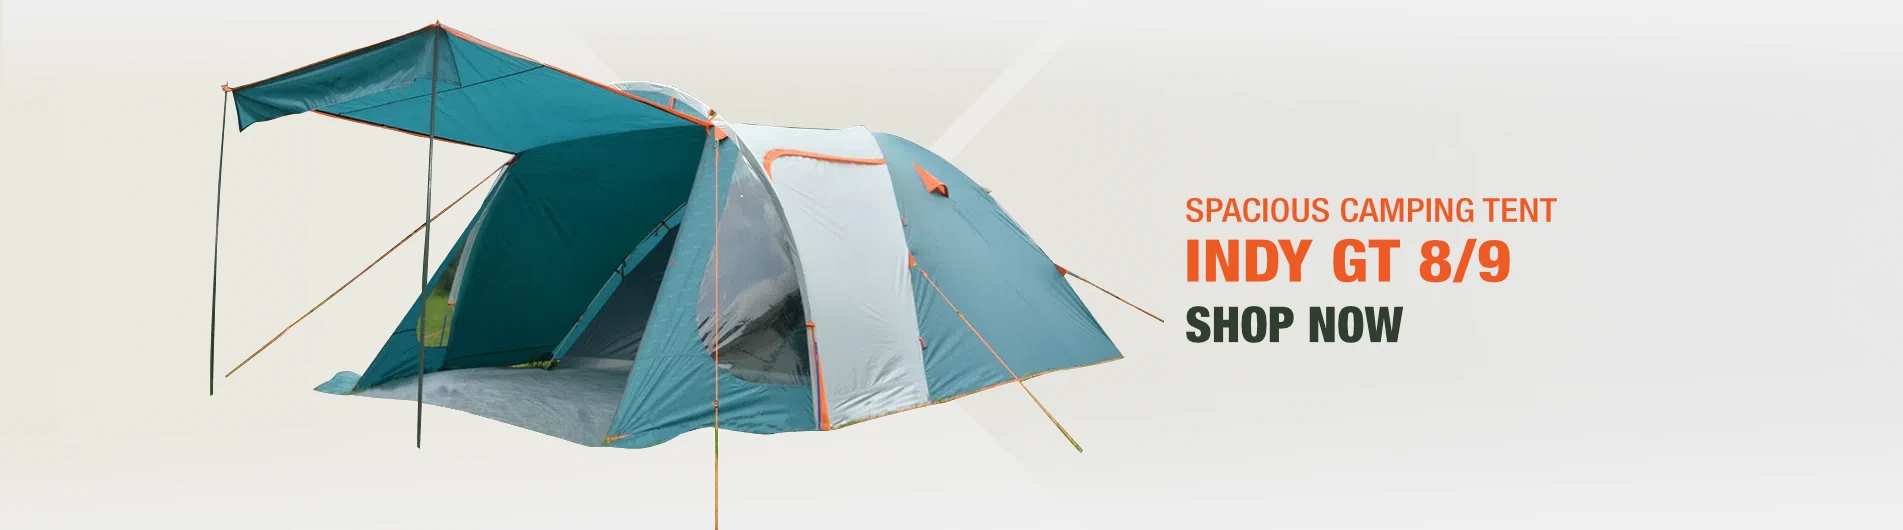 NTK Indy GT 8/9 Camping Tent